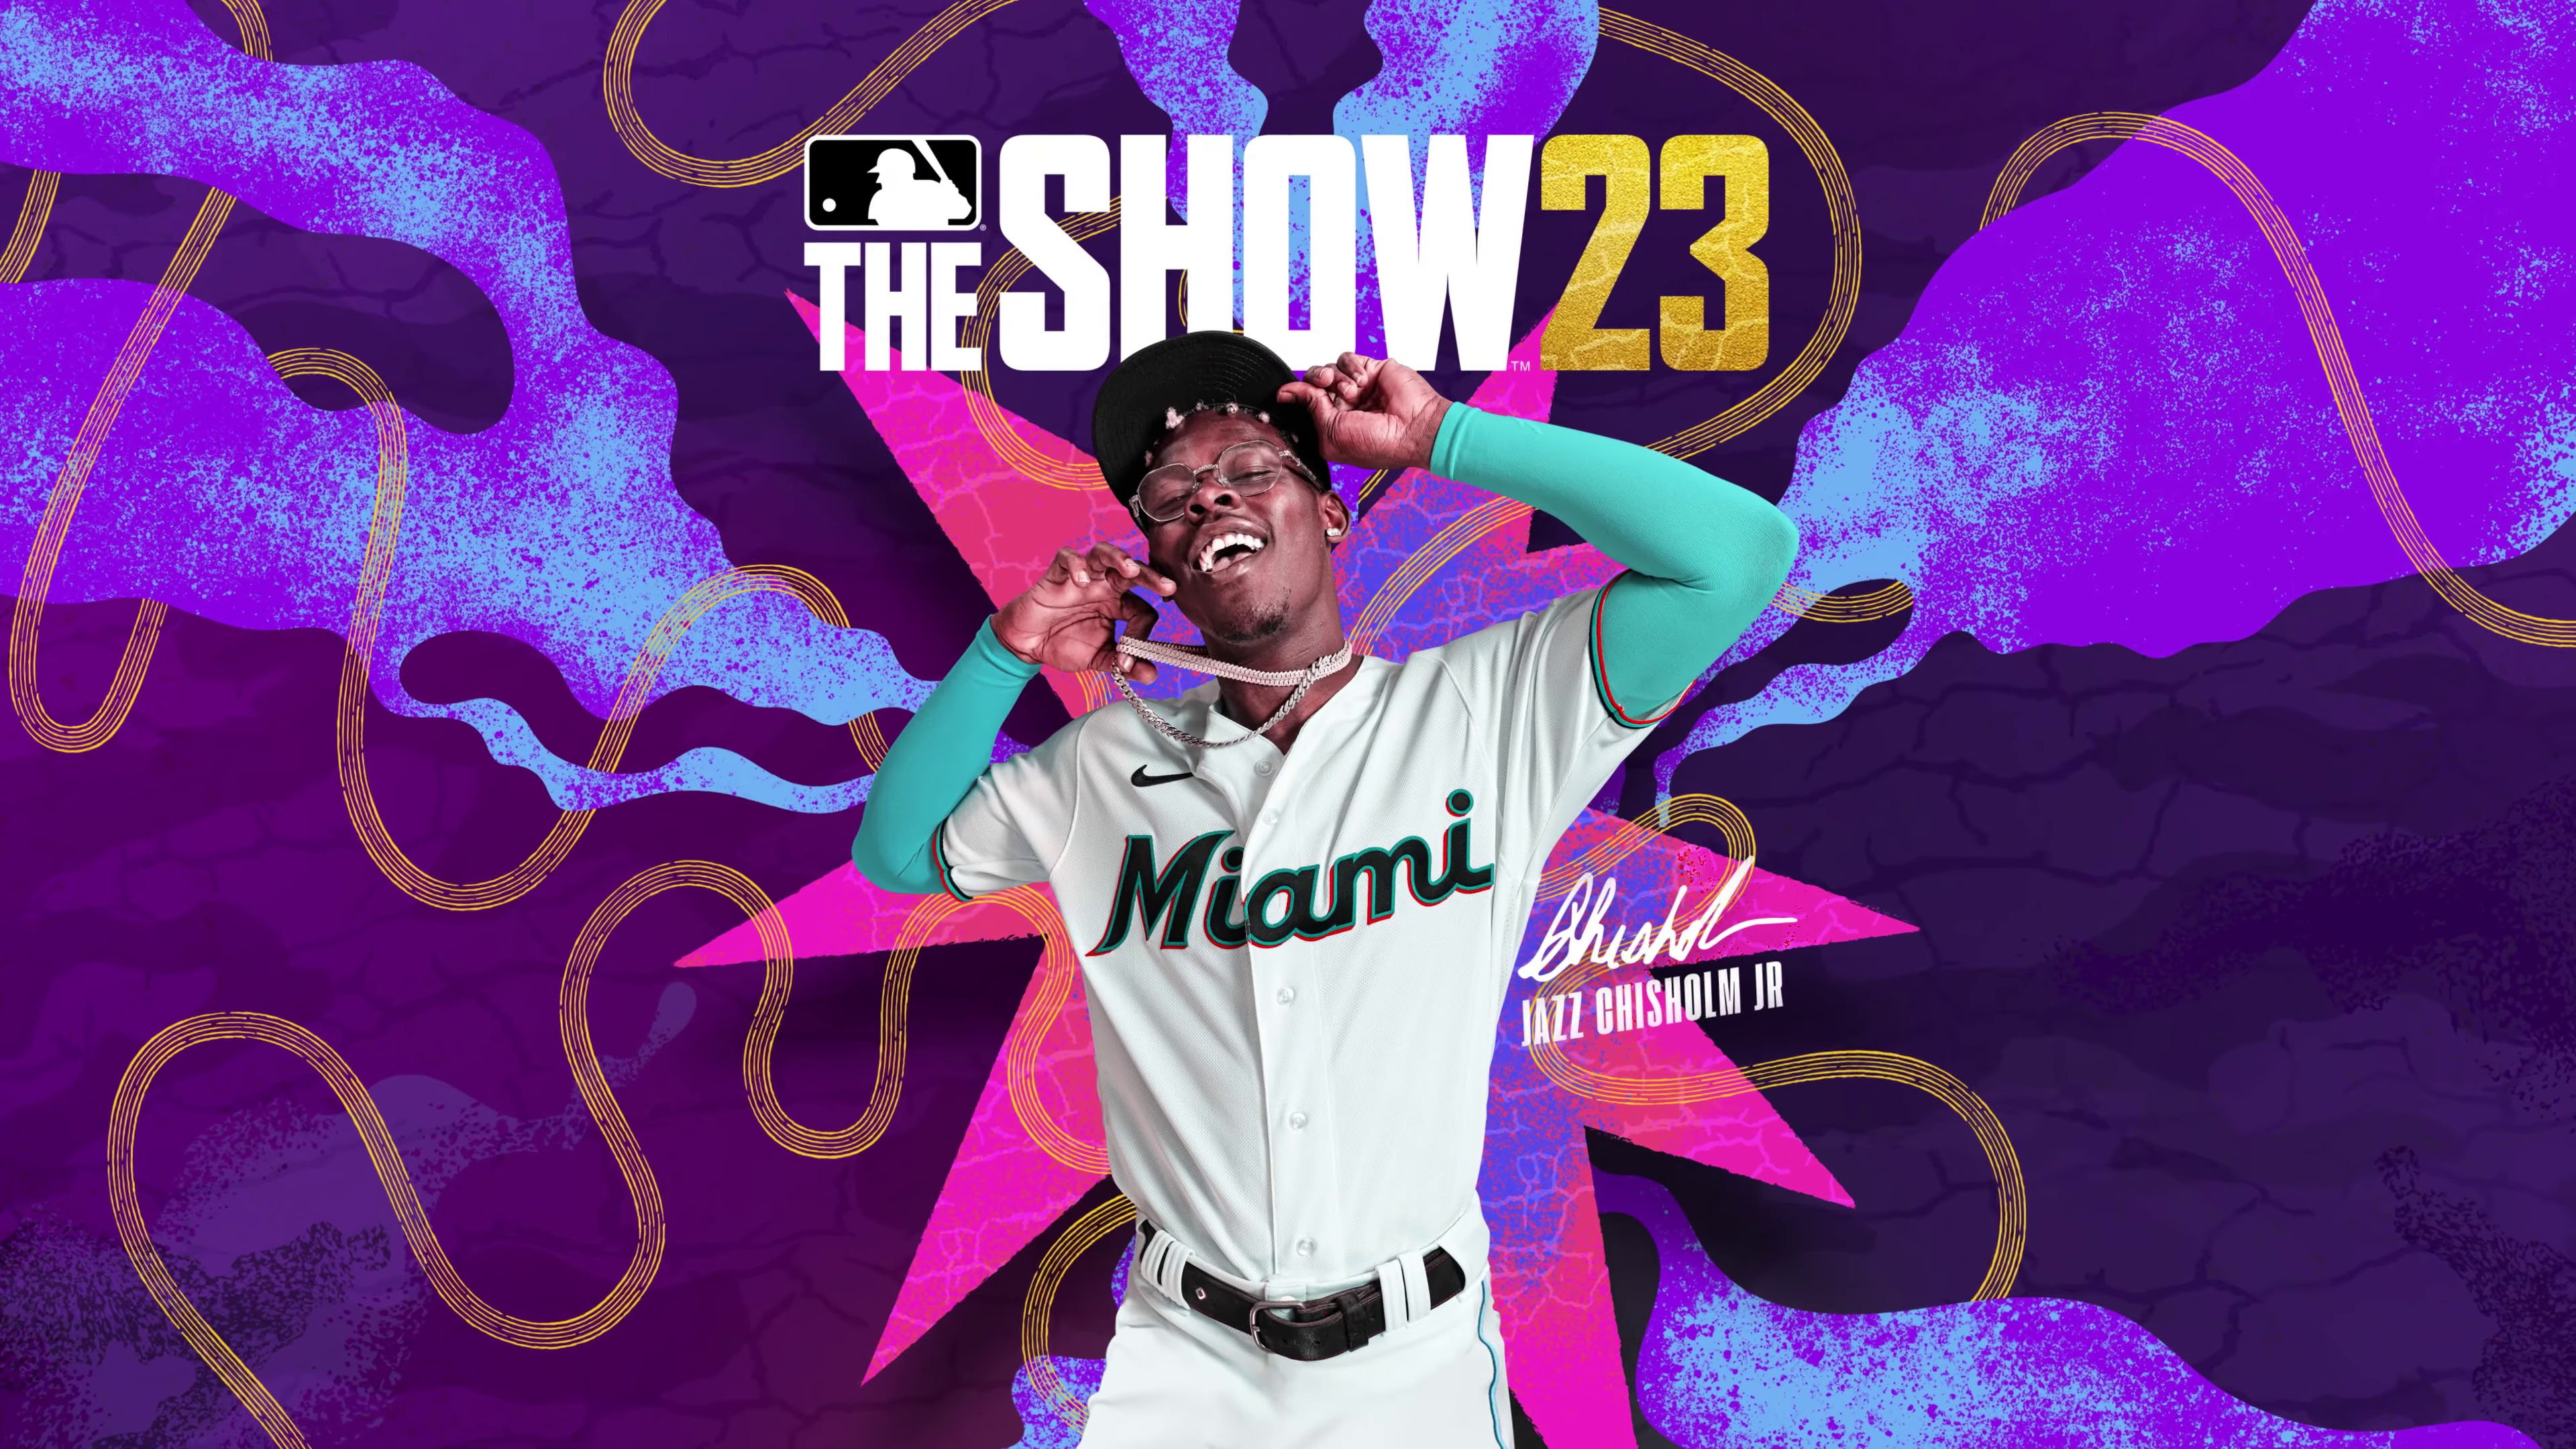 MLB The Show 23 for PlayStation 4